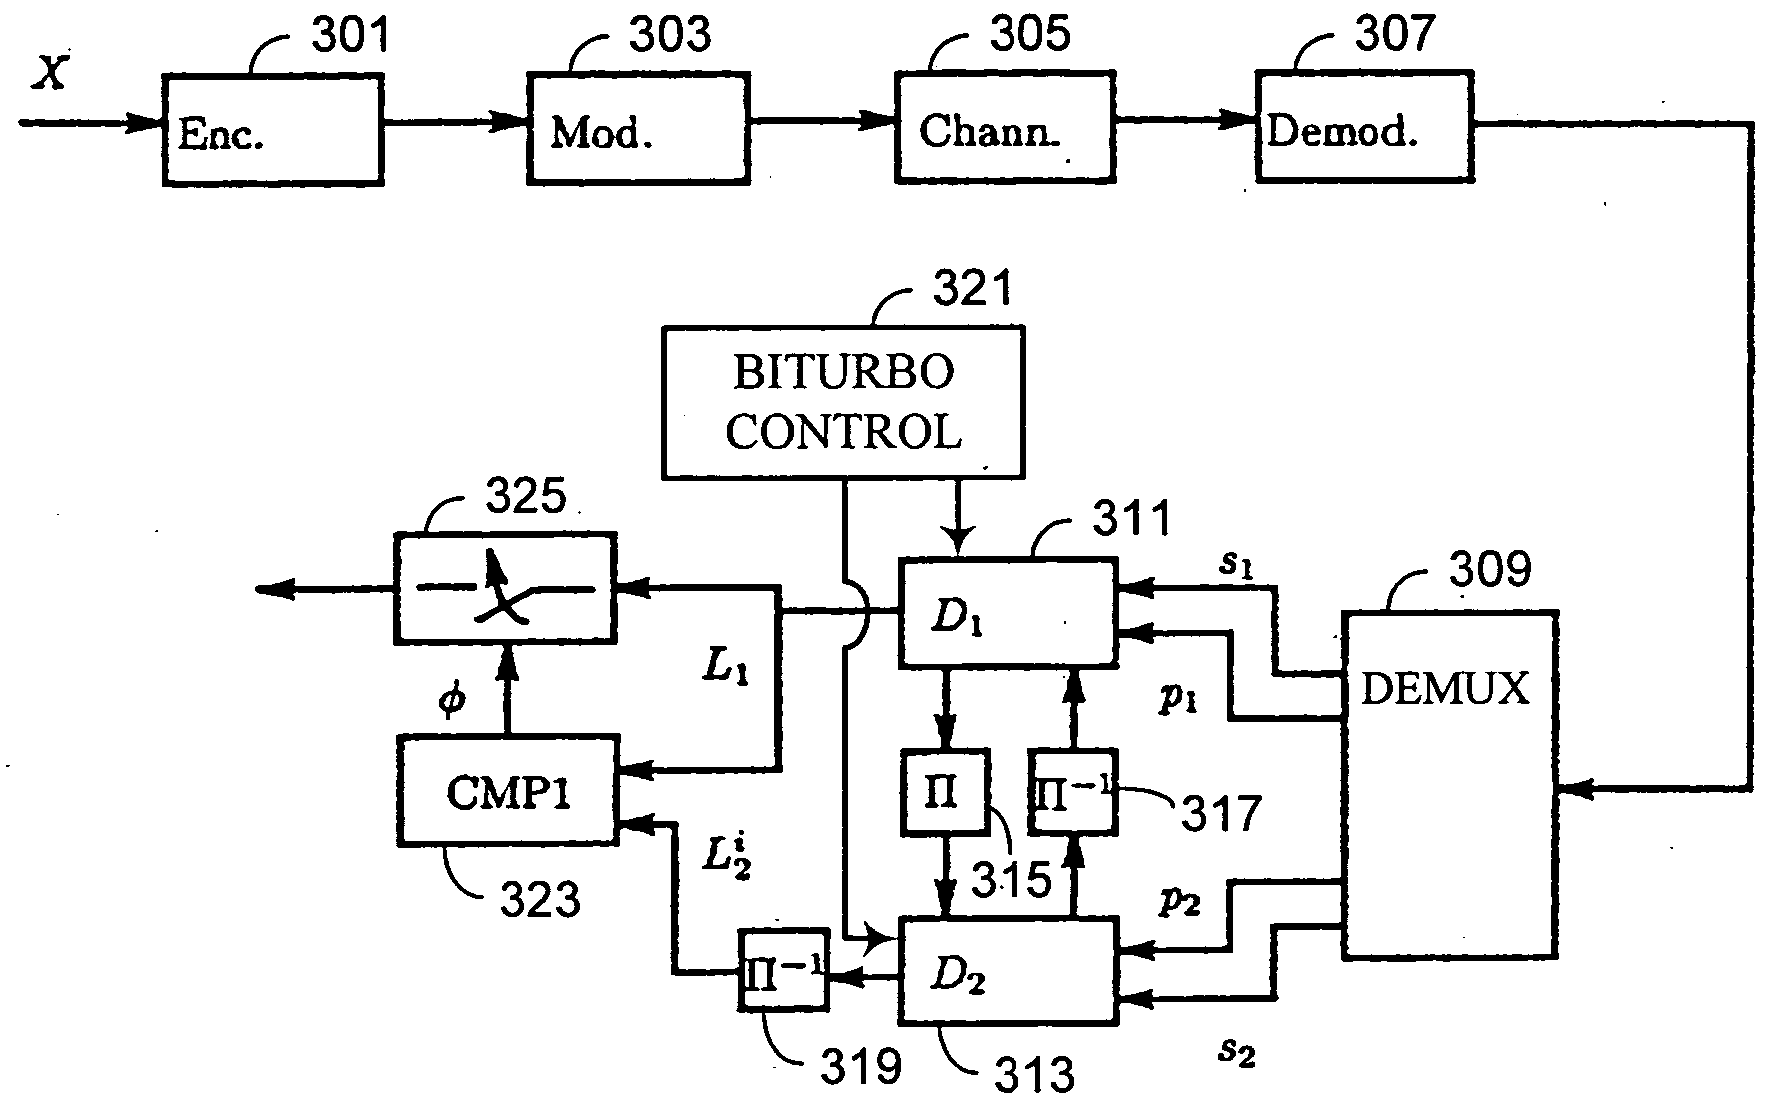 Fast iteration termination of Turbo decoding